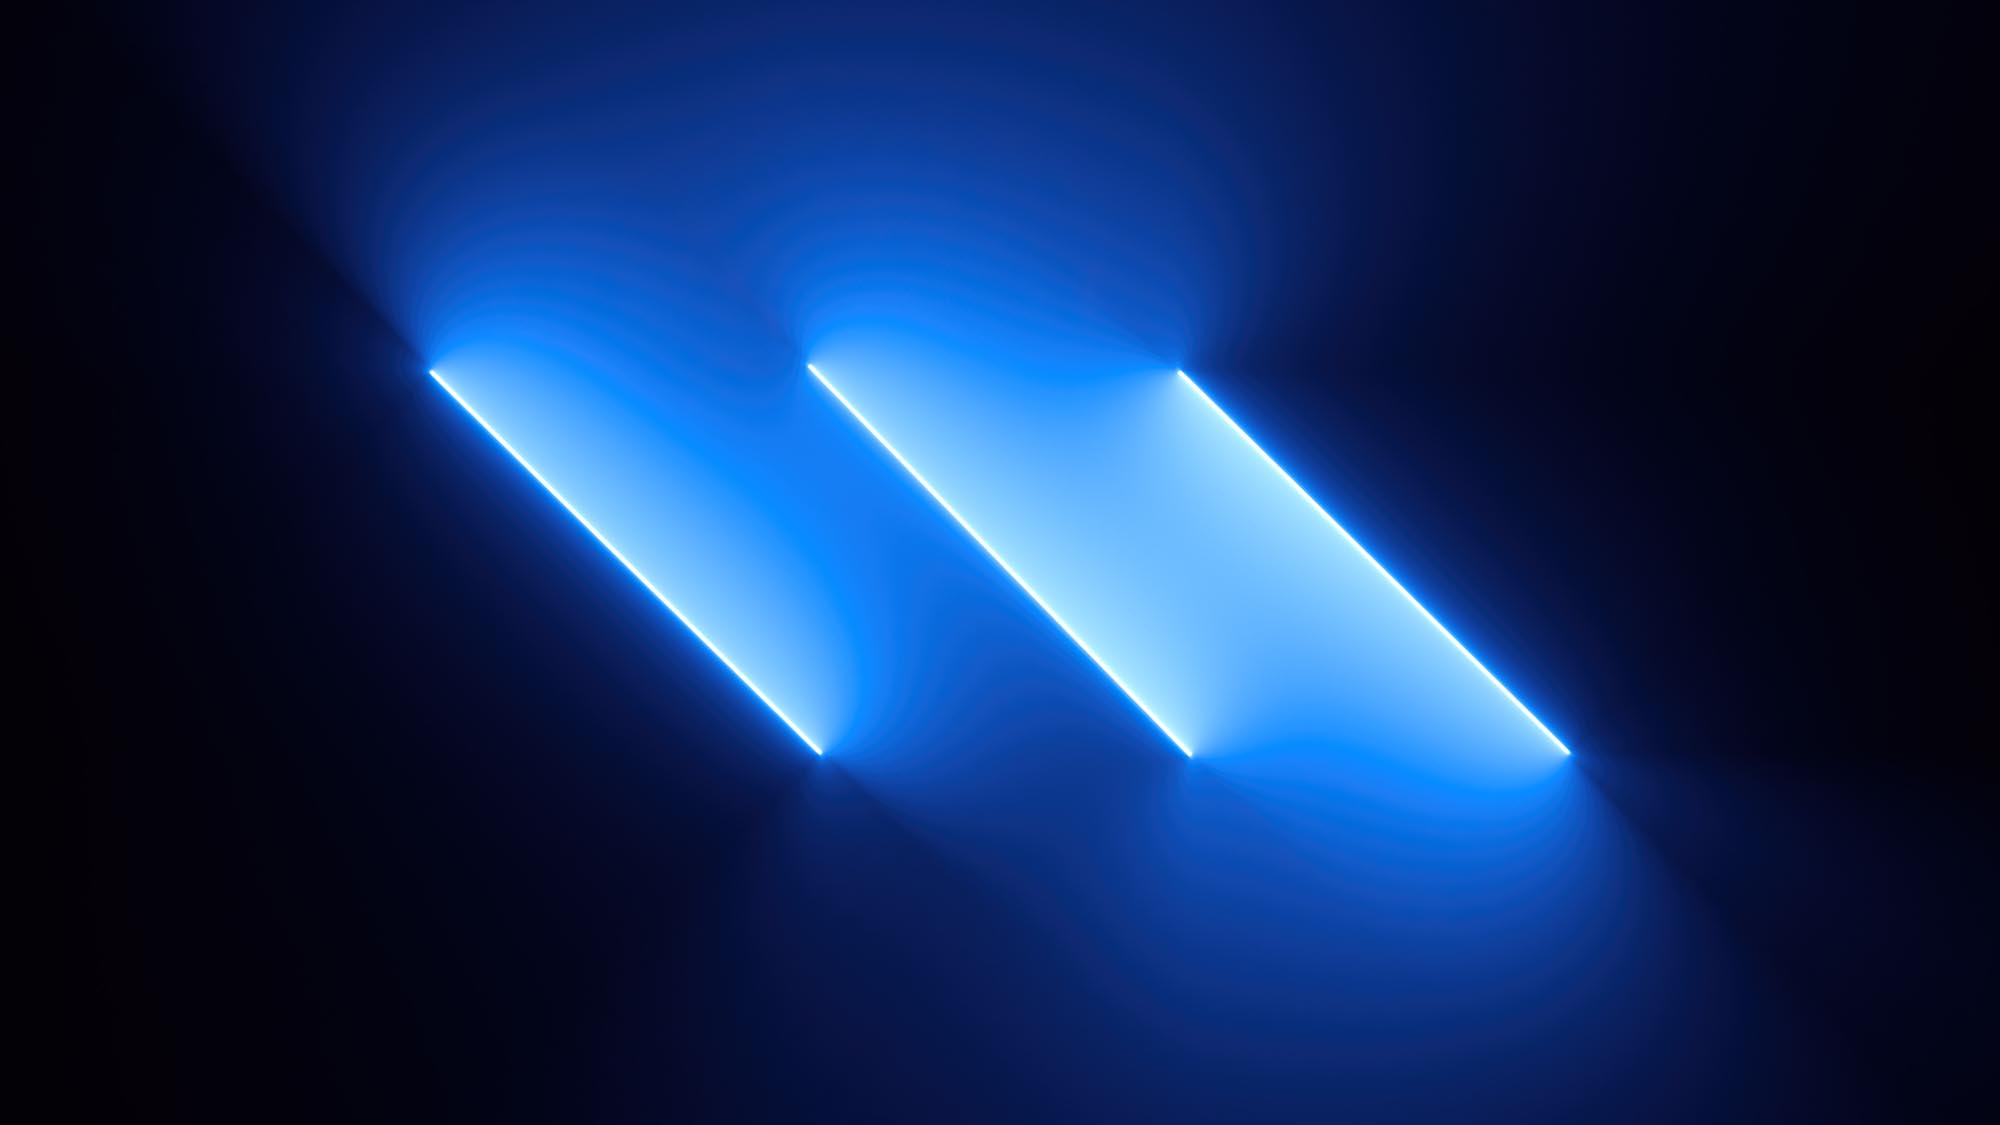 abstract minimal geometric blue neon background with three parallel lines